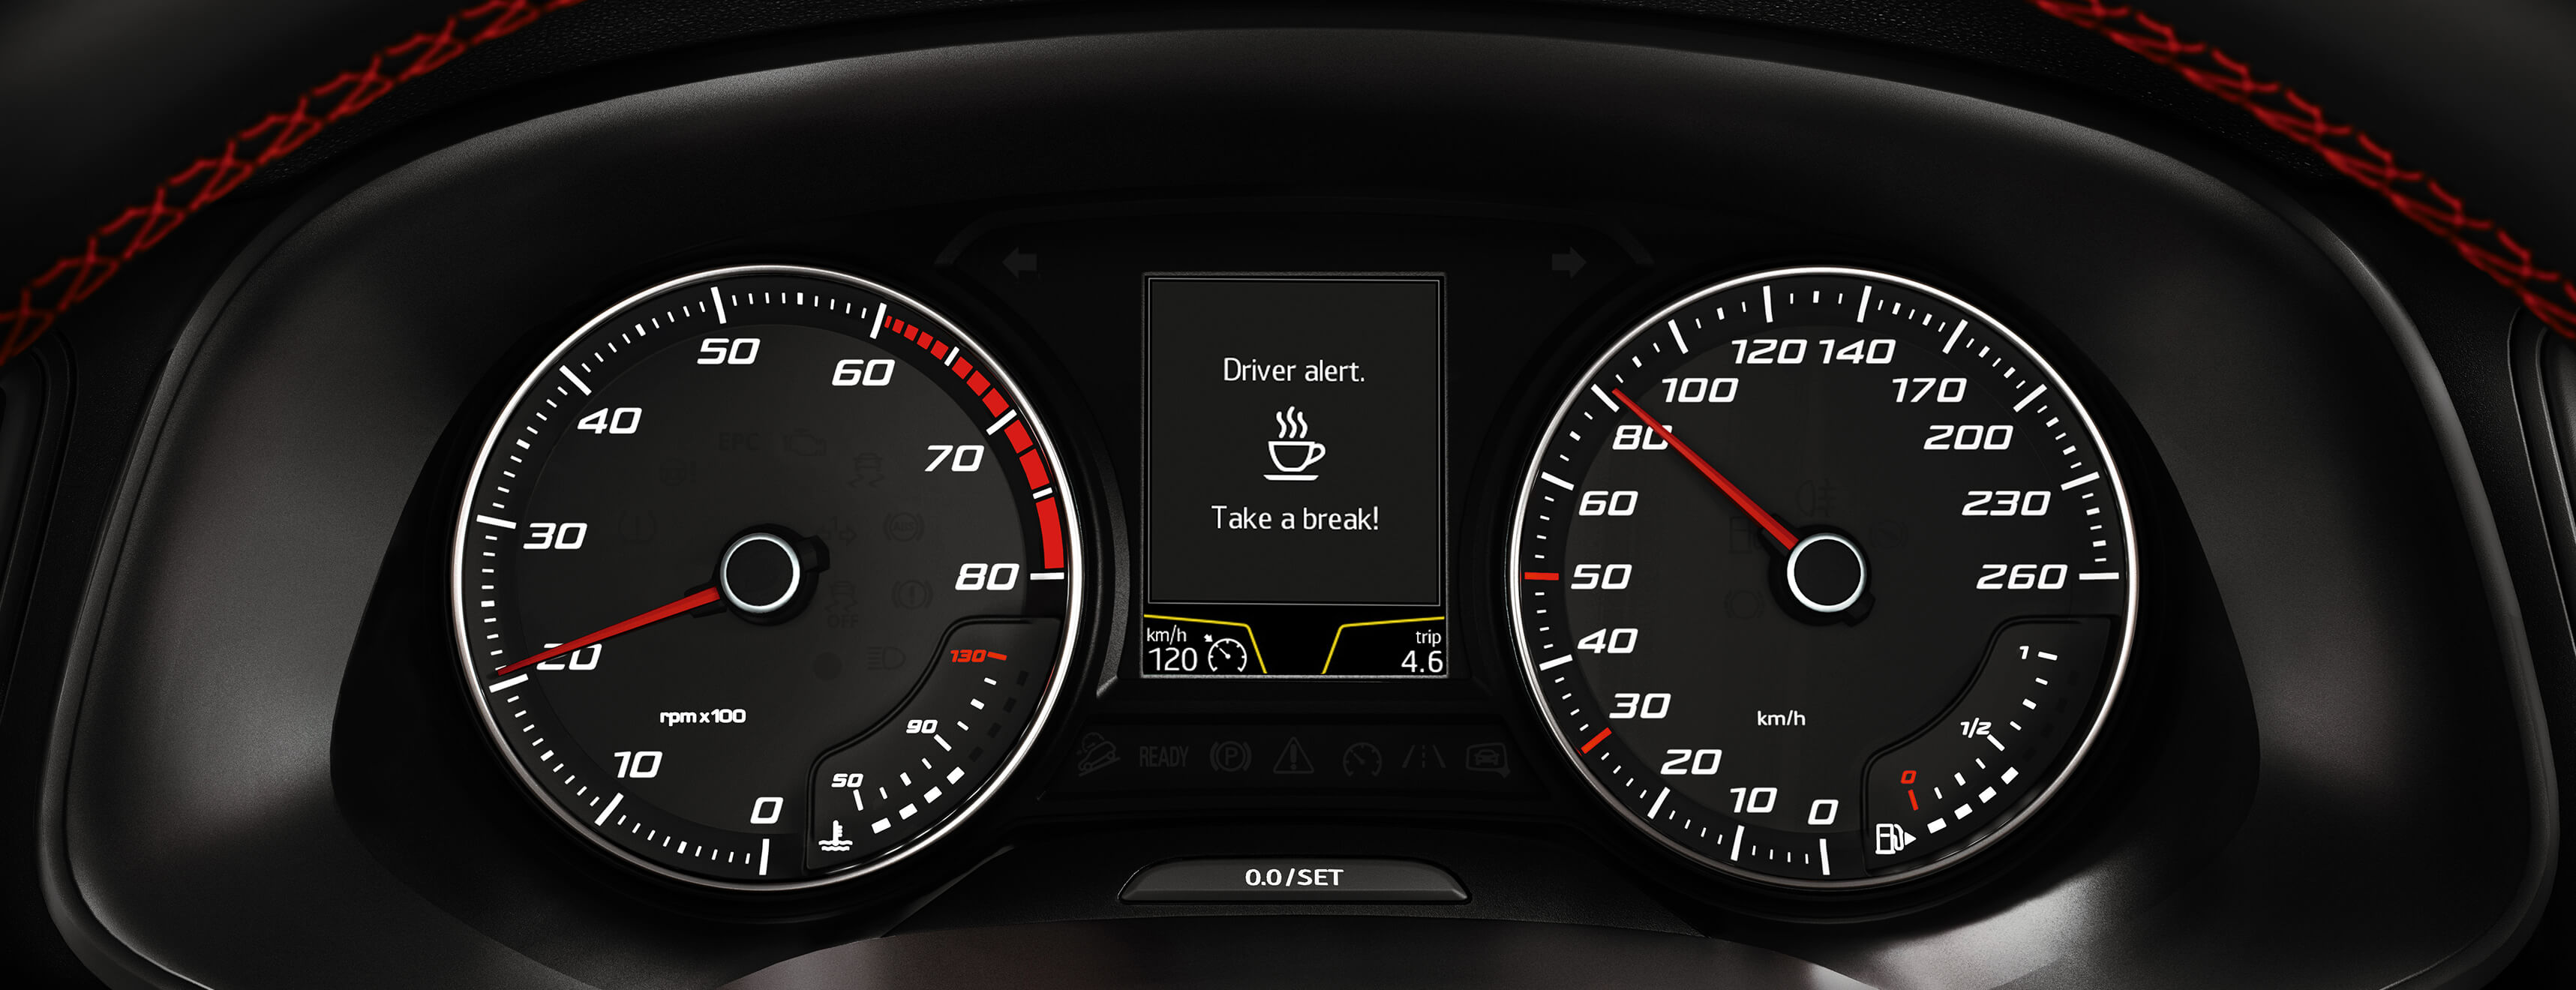 SEAT Leon  Tiredness Recognition System